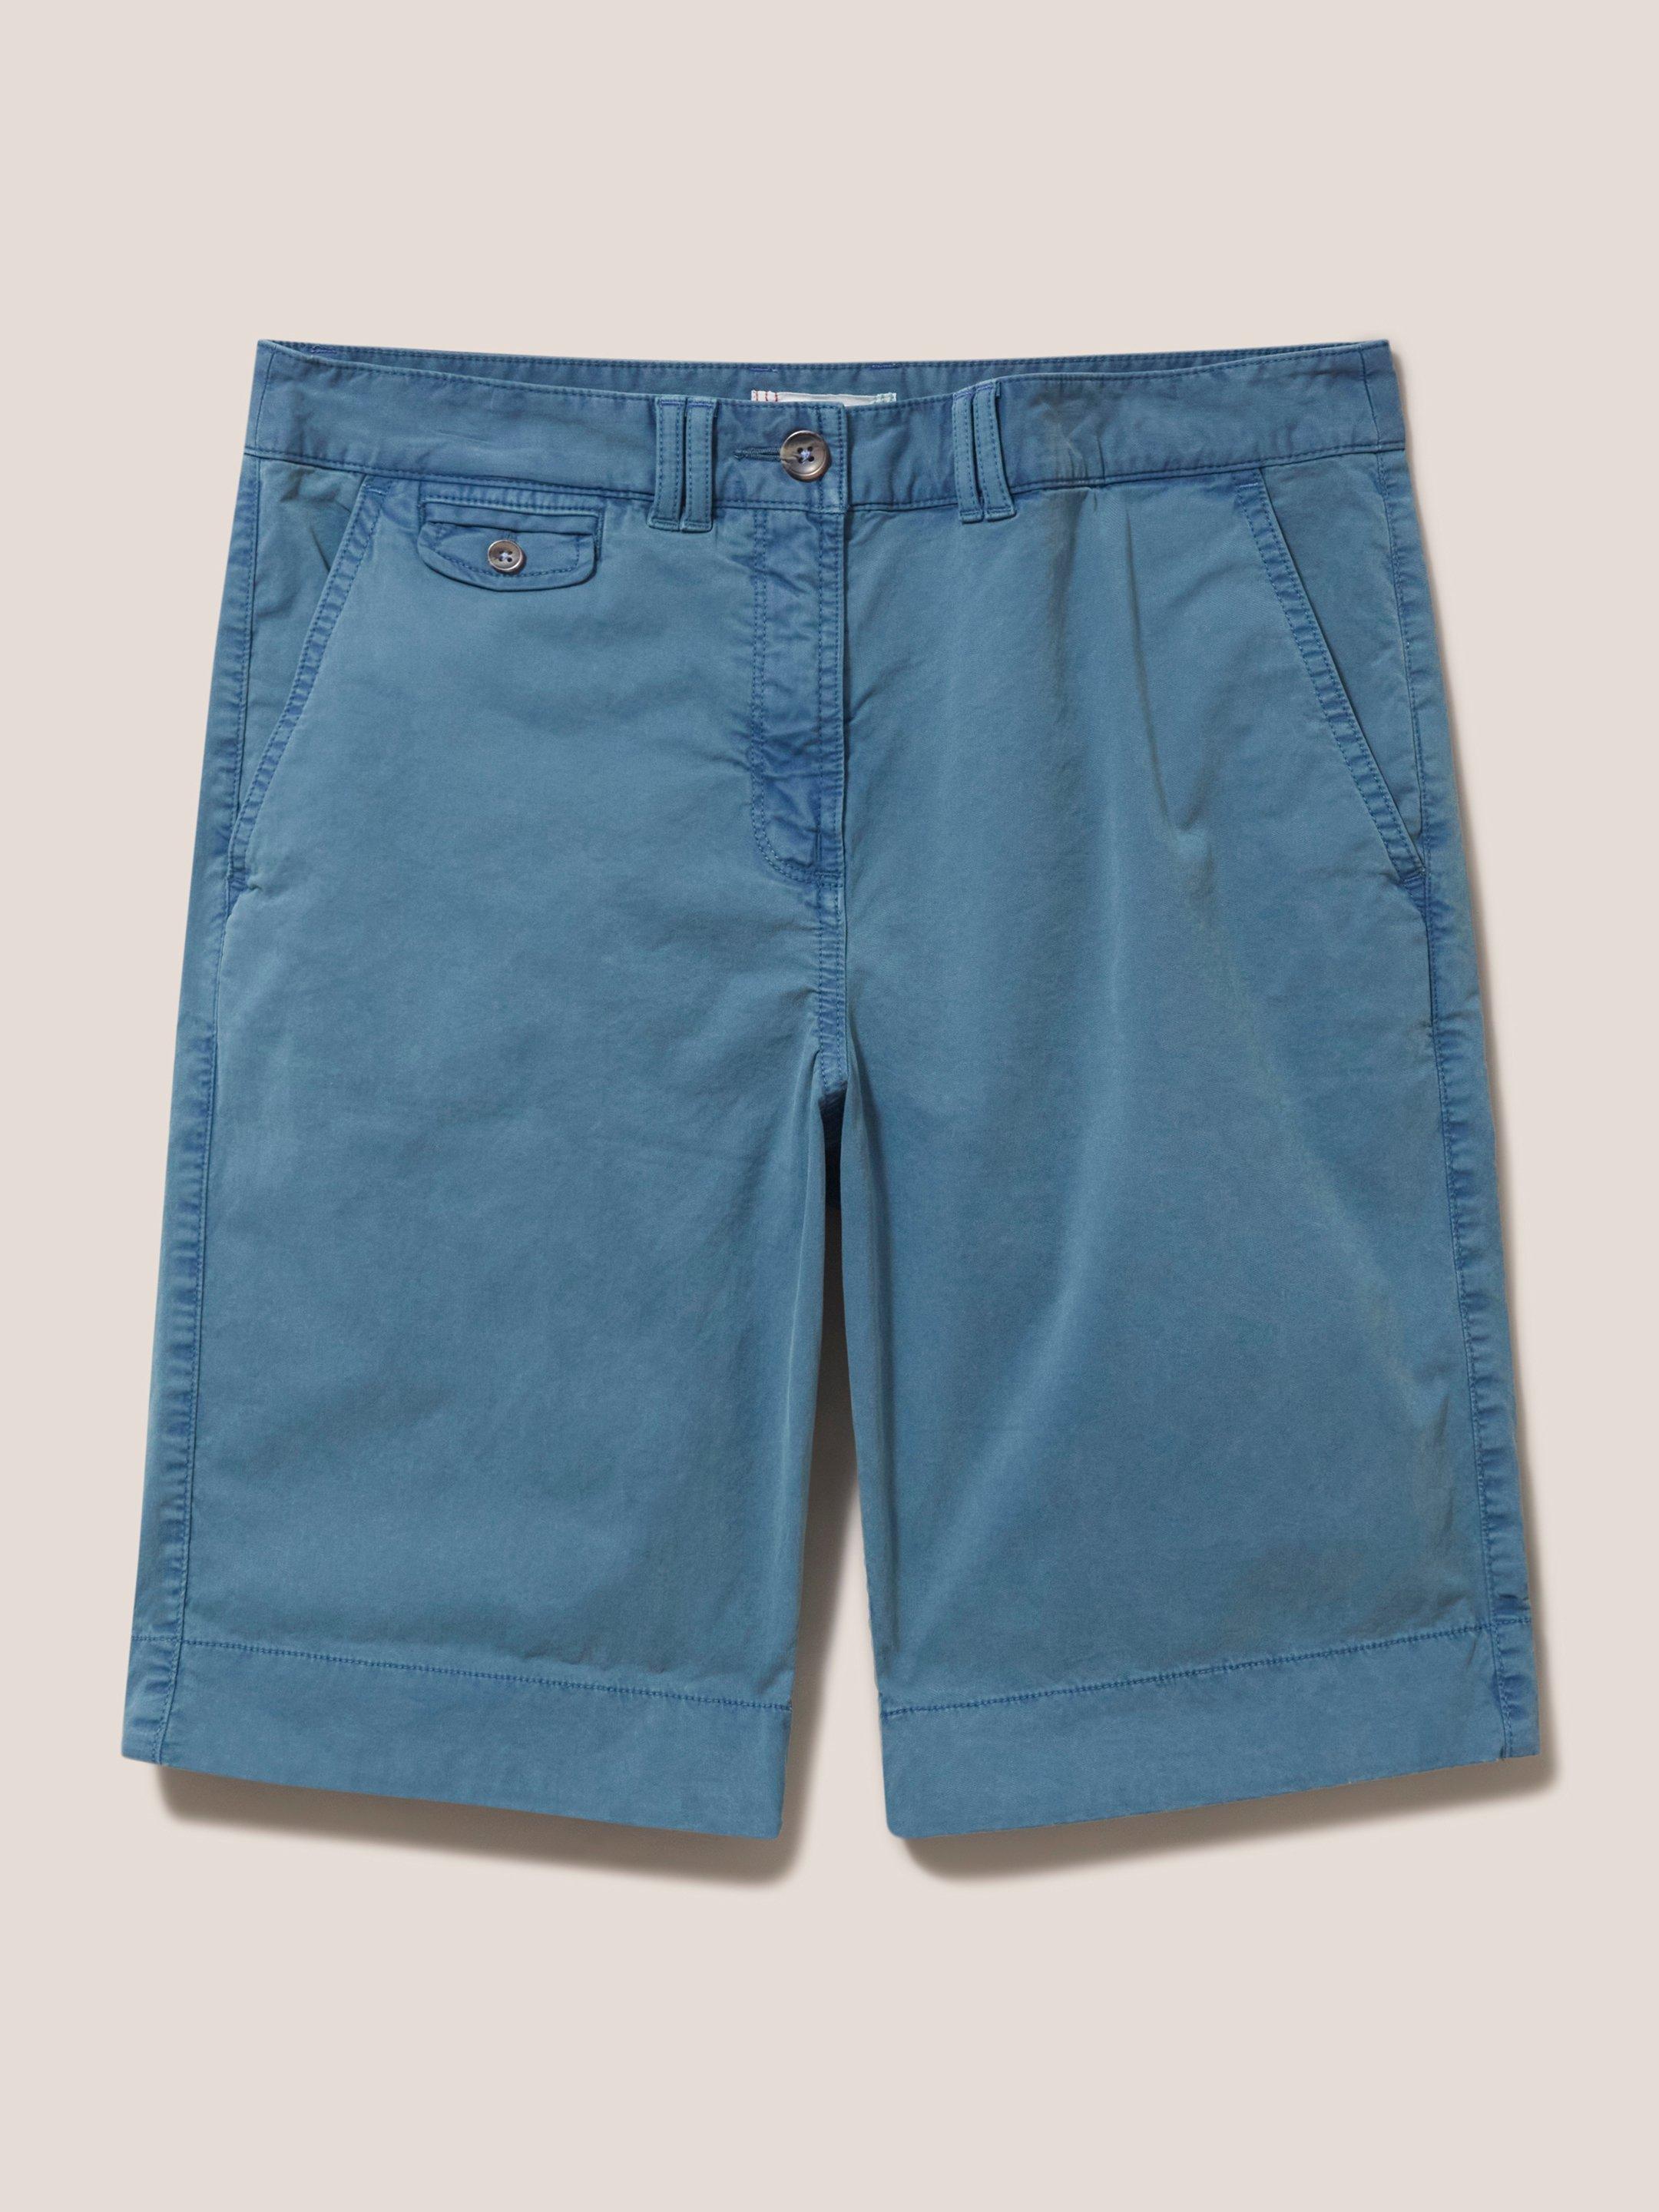 Hayley Organic Chino Shorts in MID TEAL - FLAT FRONT